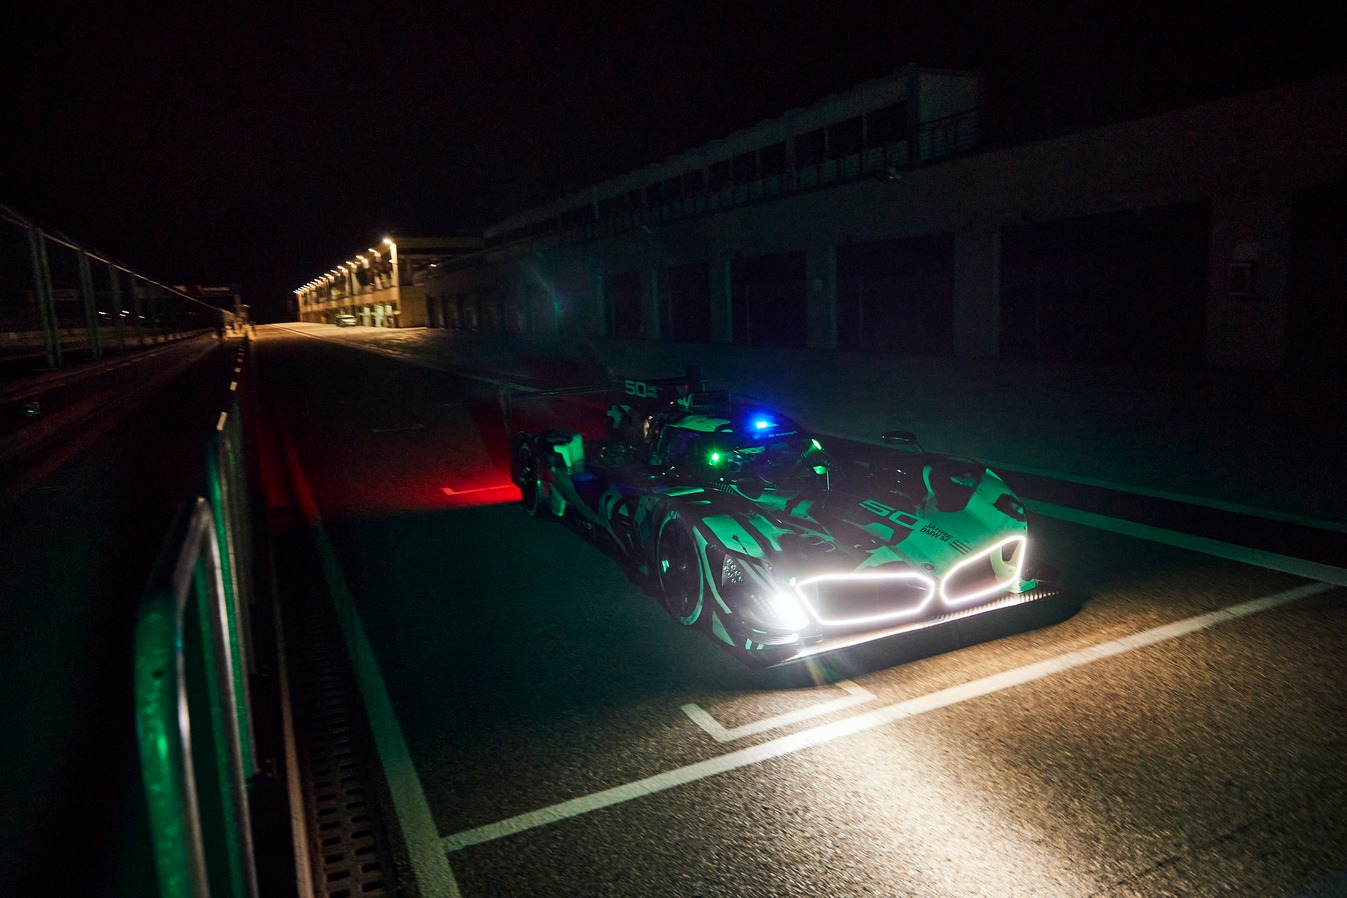 The LMDh BMW M Hybrid V8 prototype was tested on the track at night